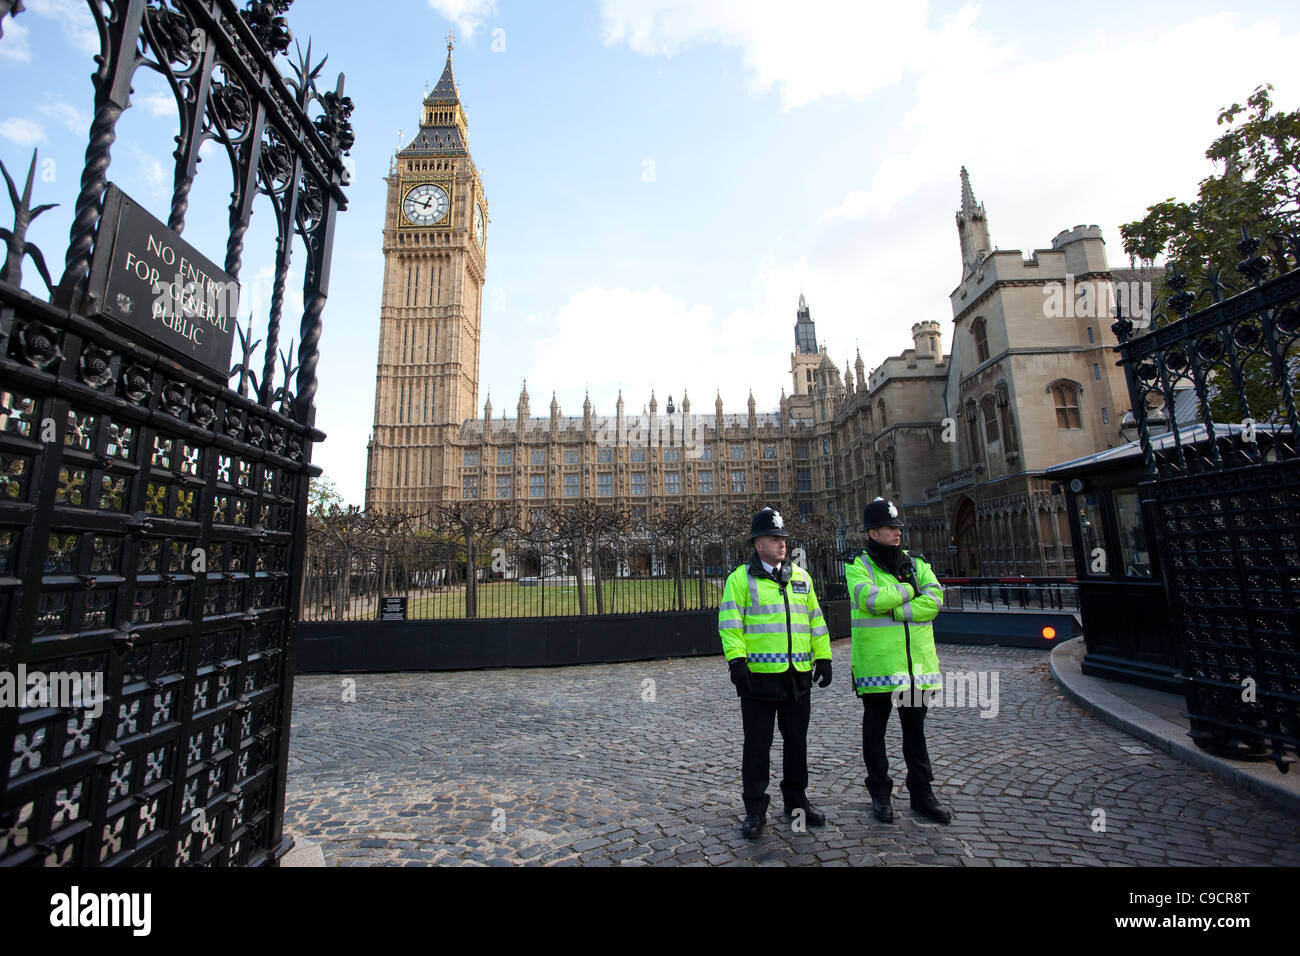 Metropolitan Police guarding the entrance to Houses of Parliament, Westminster, London, UK. Photo:Jeff Gilbert Stock Photo